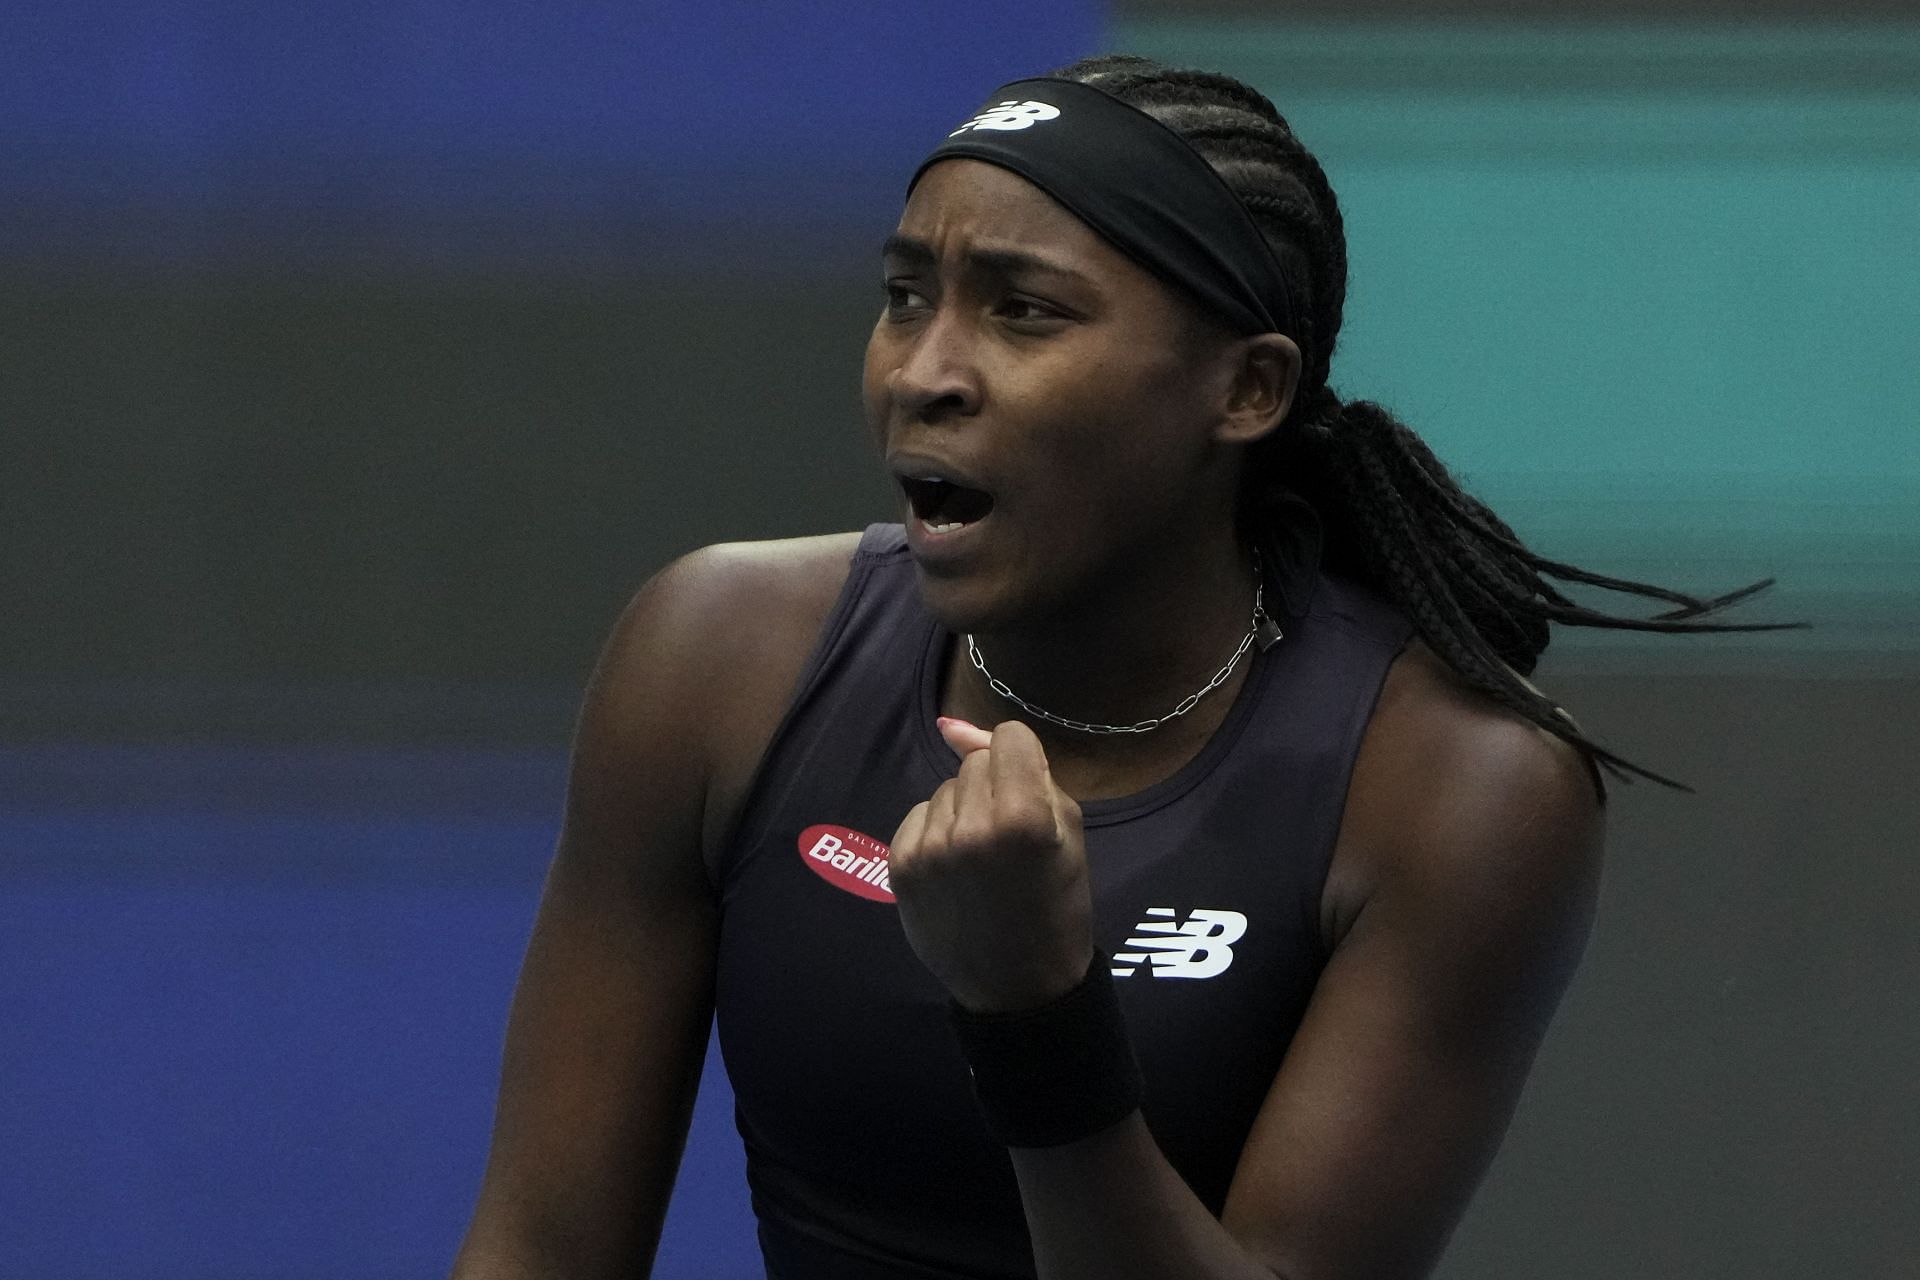 Coco Gauff at the China Open Tennis.